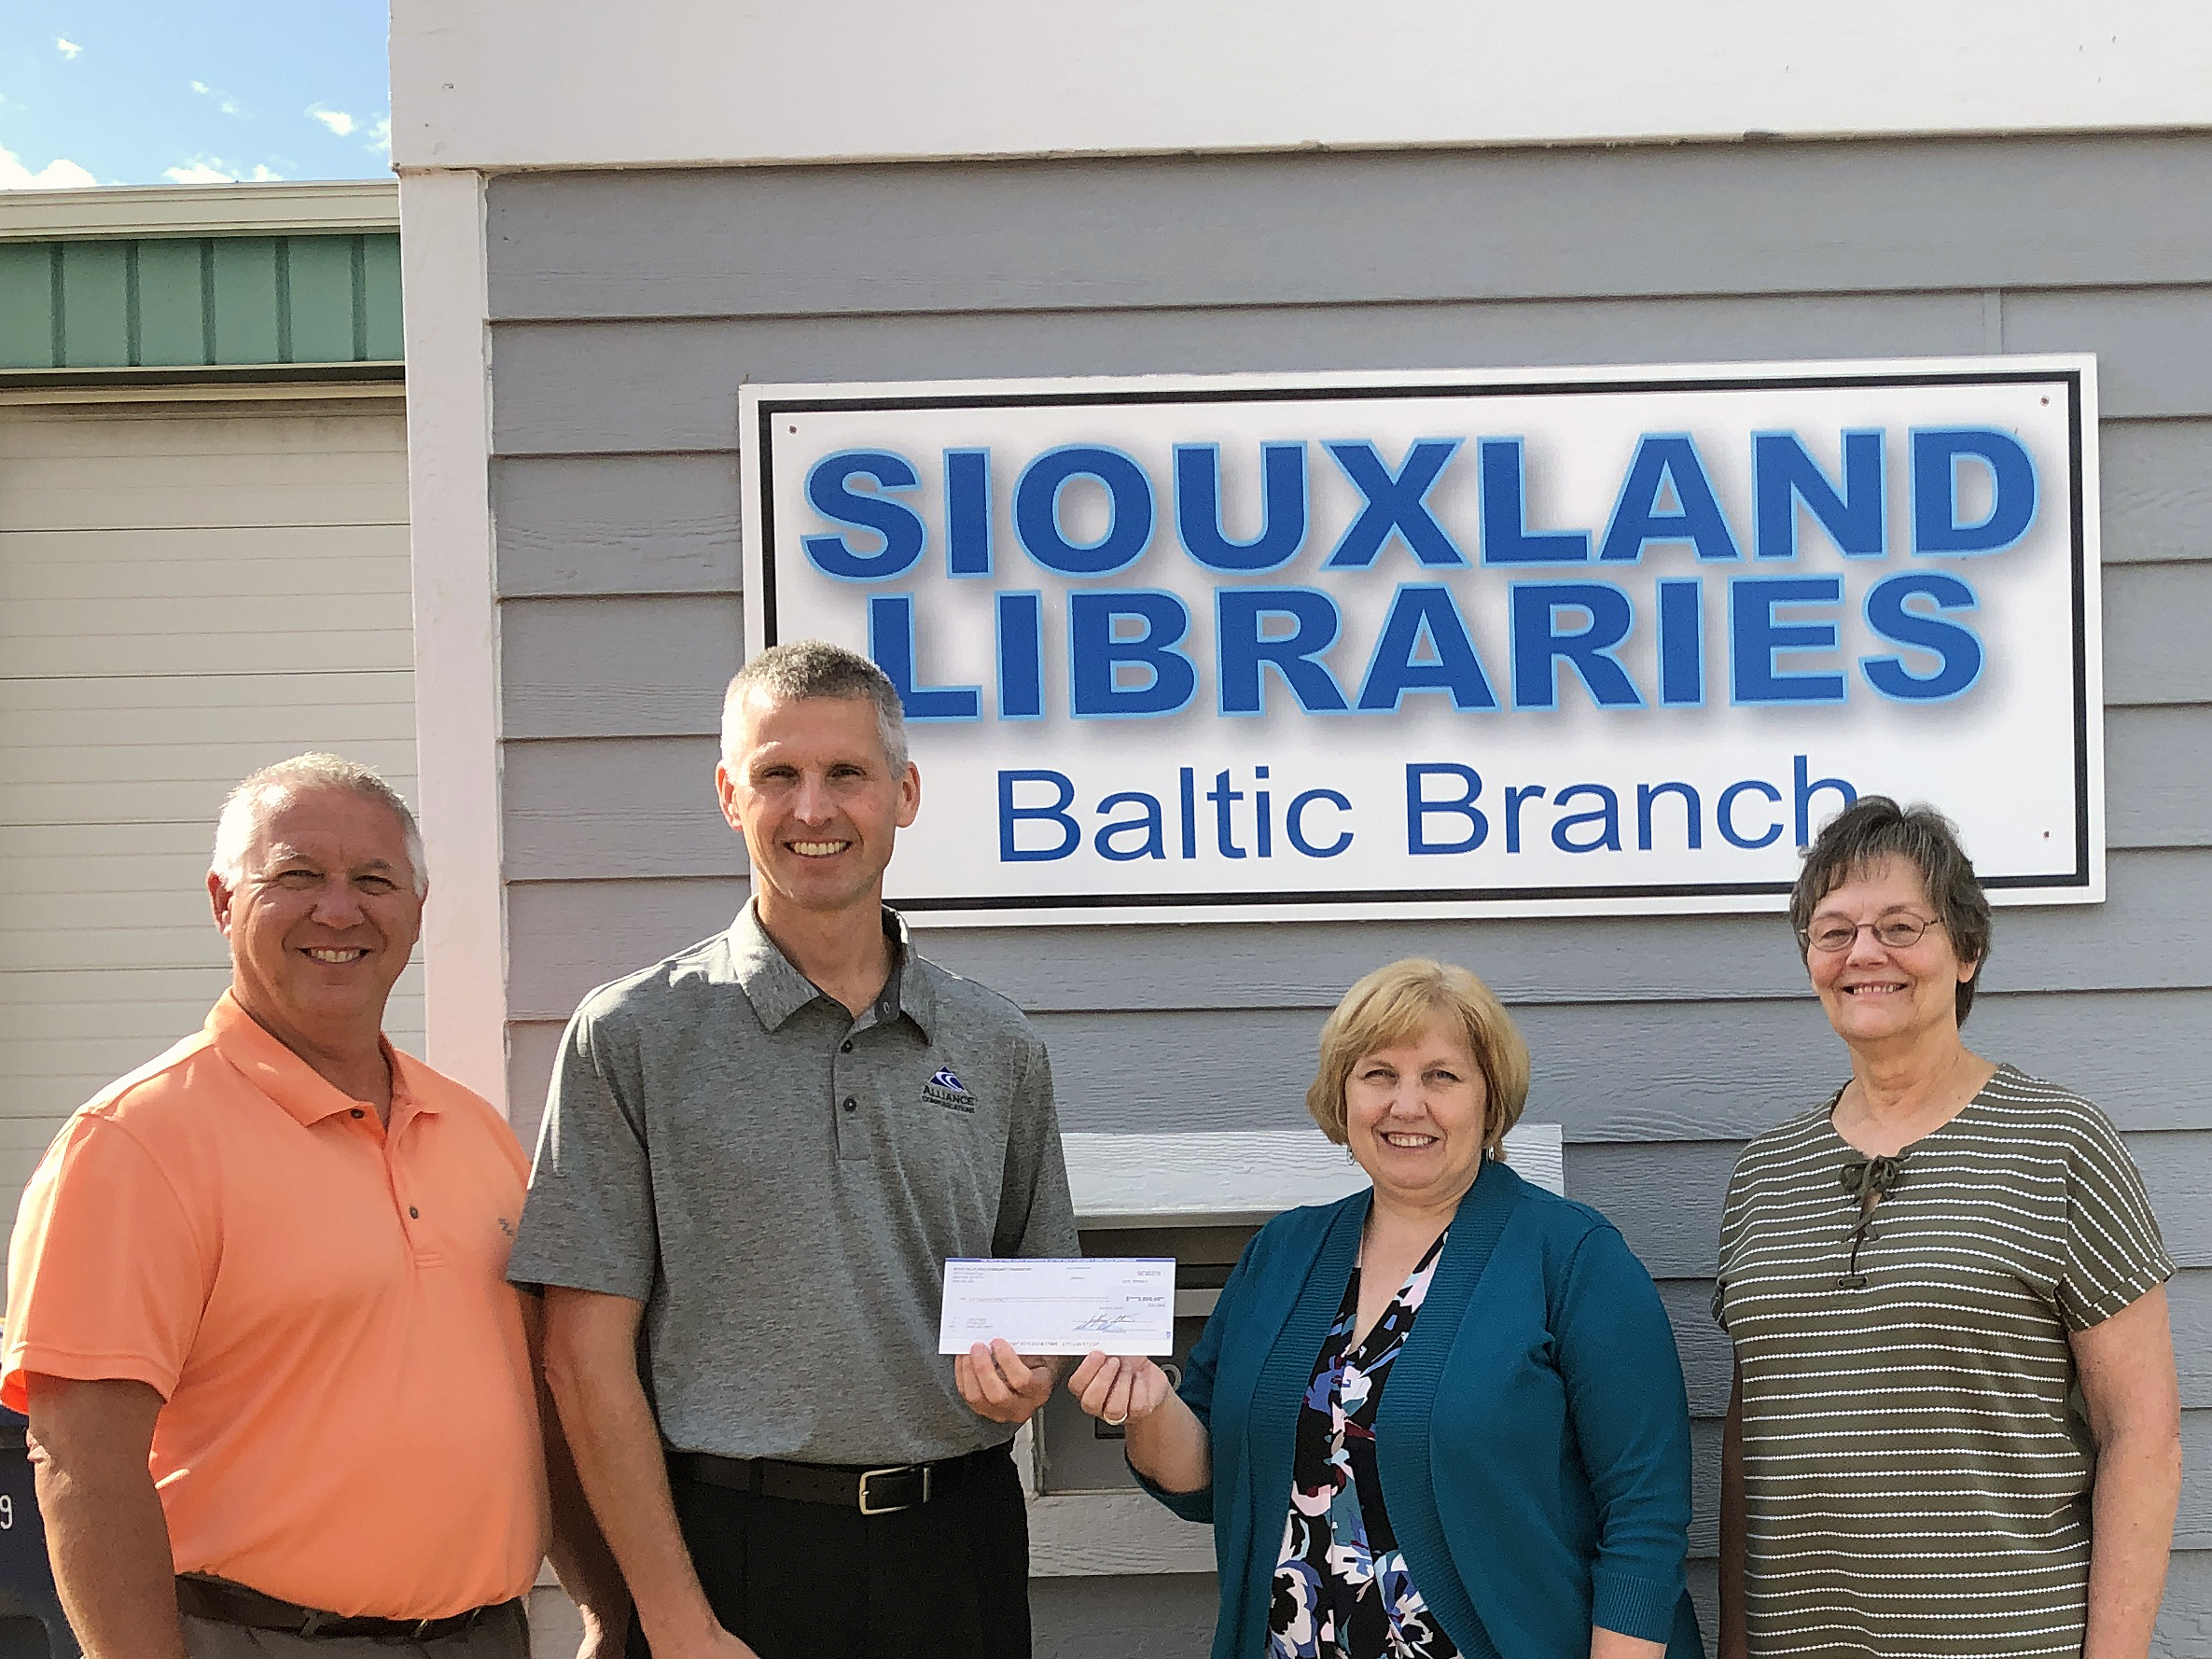 The Baltic library received a Keep the Change grant.